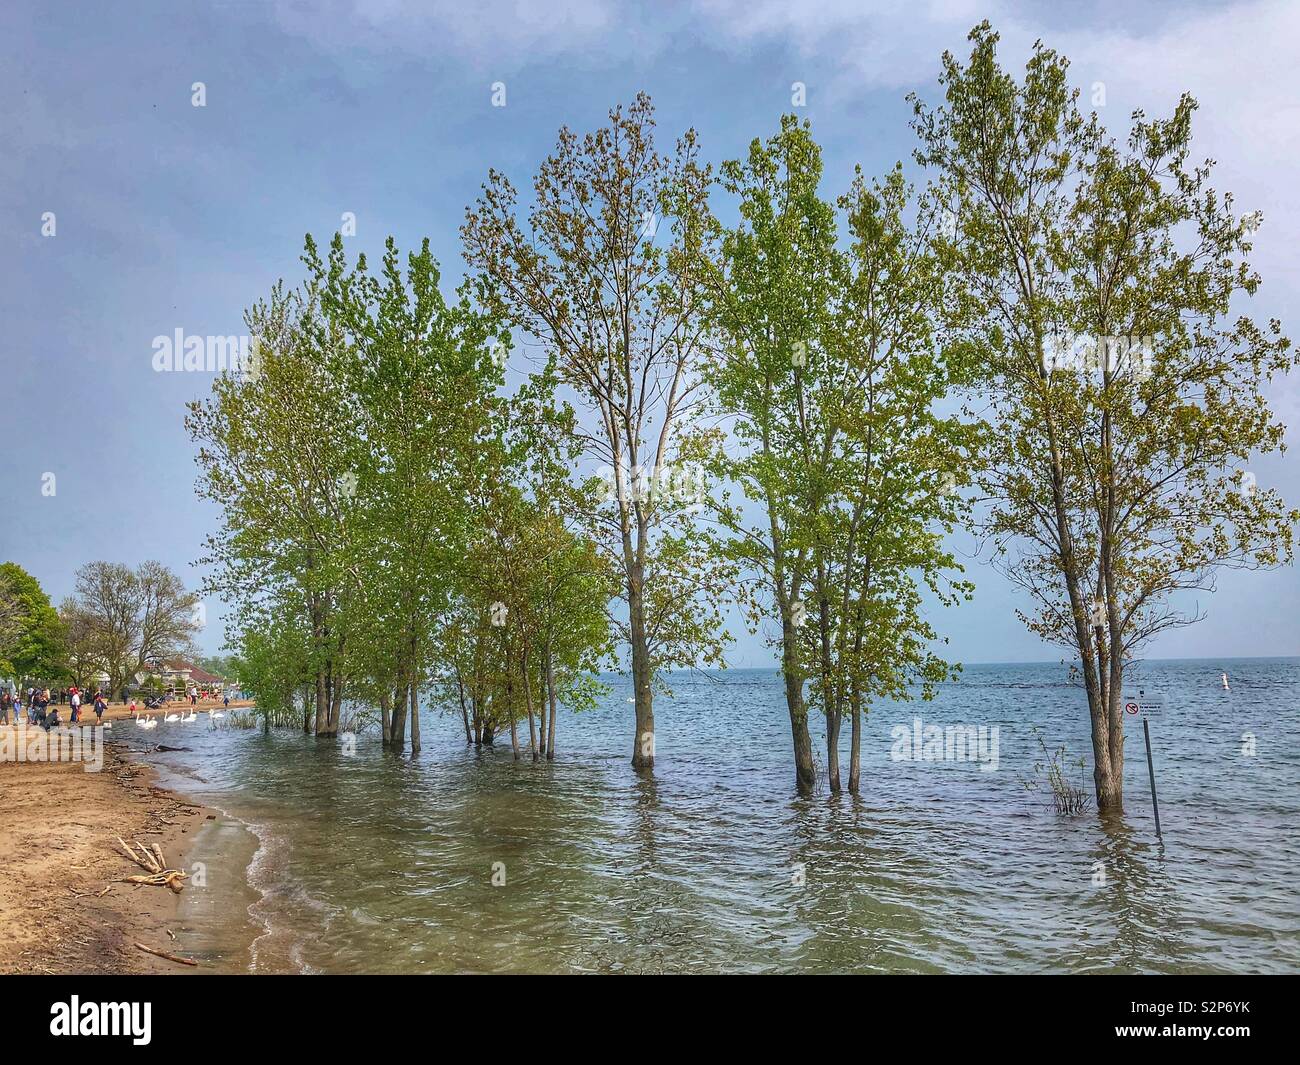 High water levels flood the beach on the shores of Lake Ontario. Stock Photo